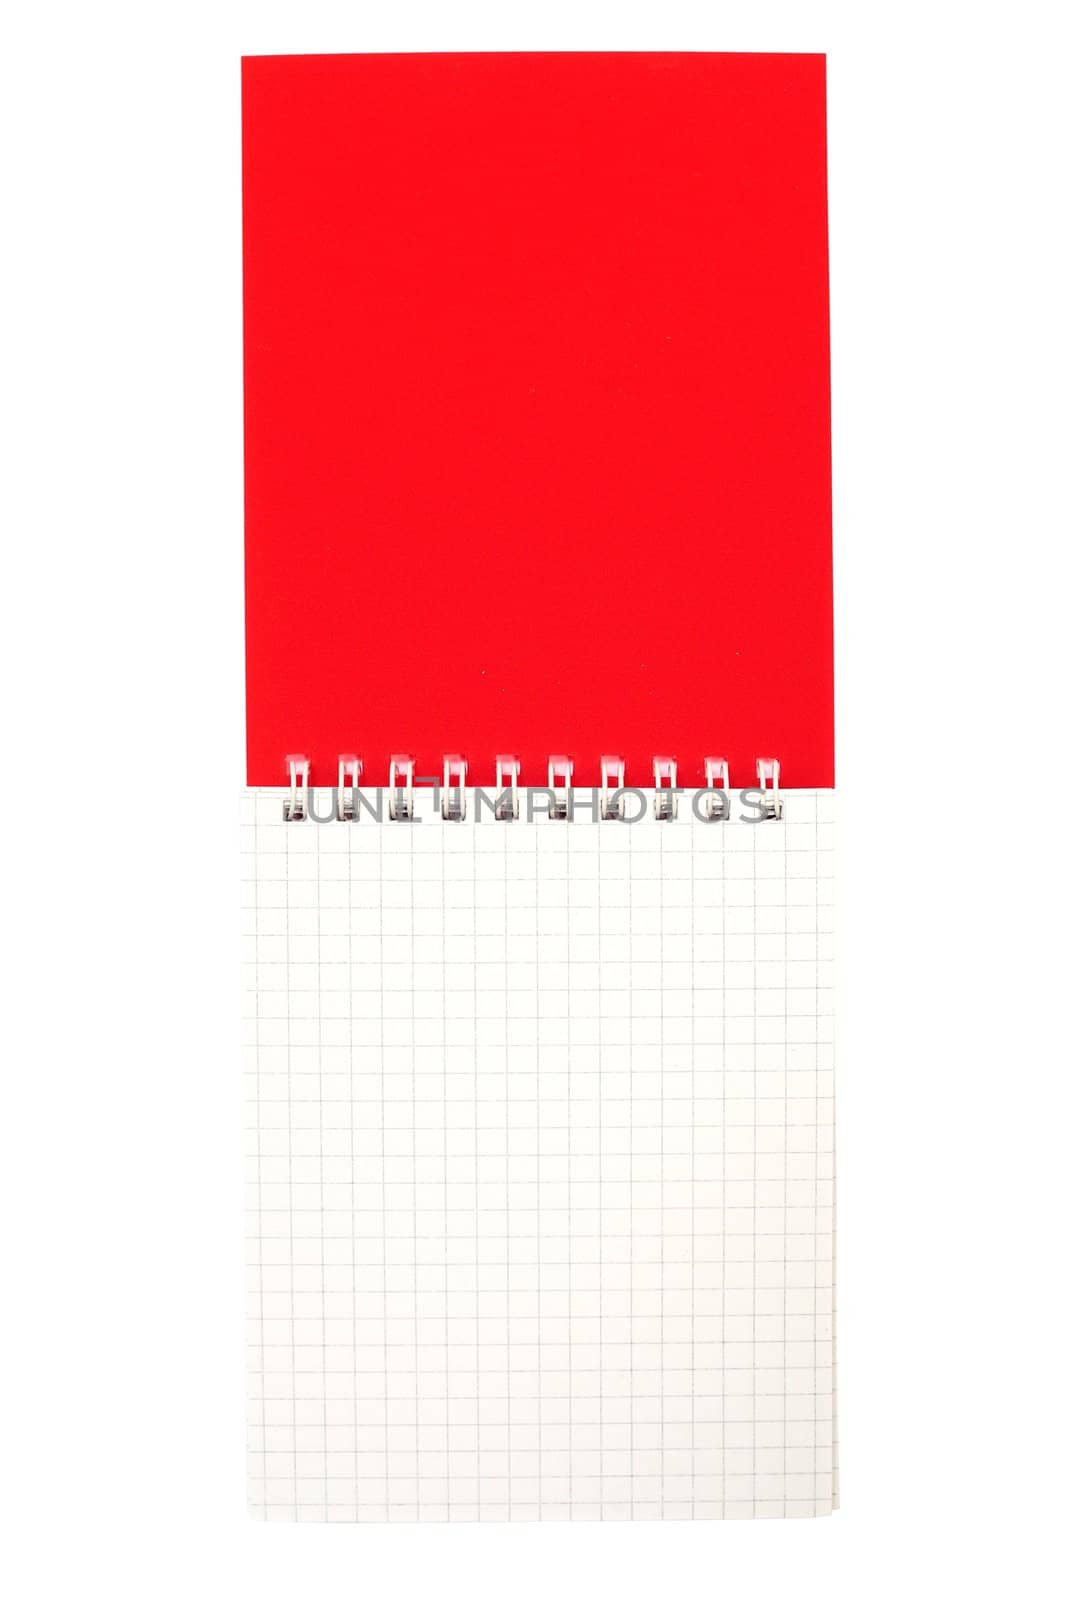 An image of open red notebook on white background